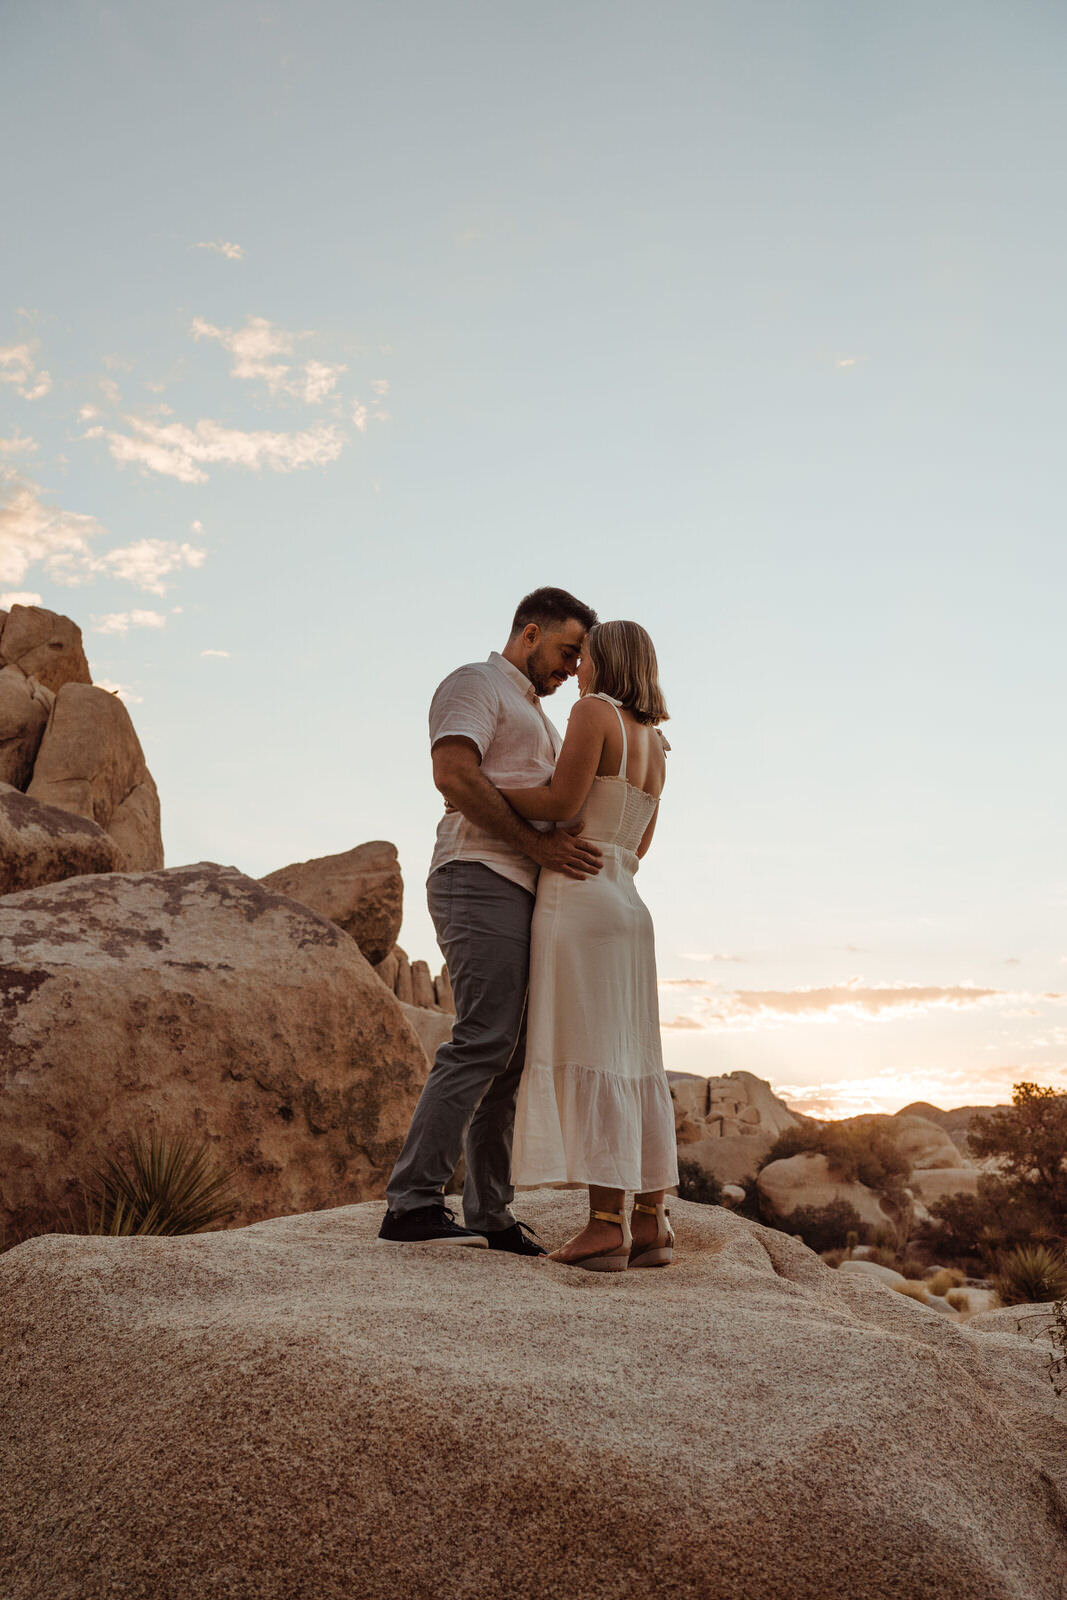 Sunrise Engagement Session in Joshua Tree, California - Couple Silhouetted By Clouds- Photos by Adventurous Elopement + Wedding Photographer Kept Record | www.keptrecord.com